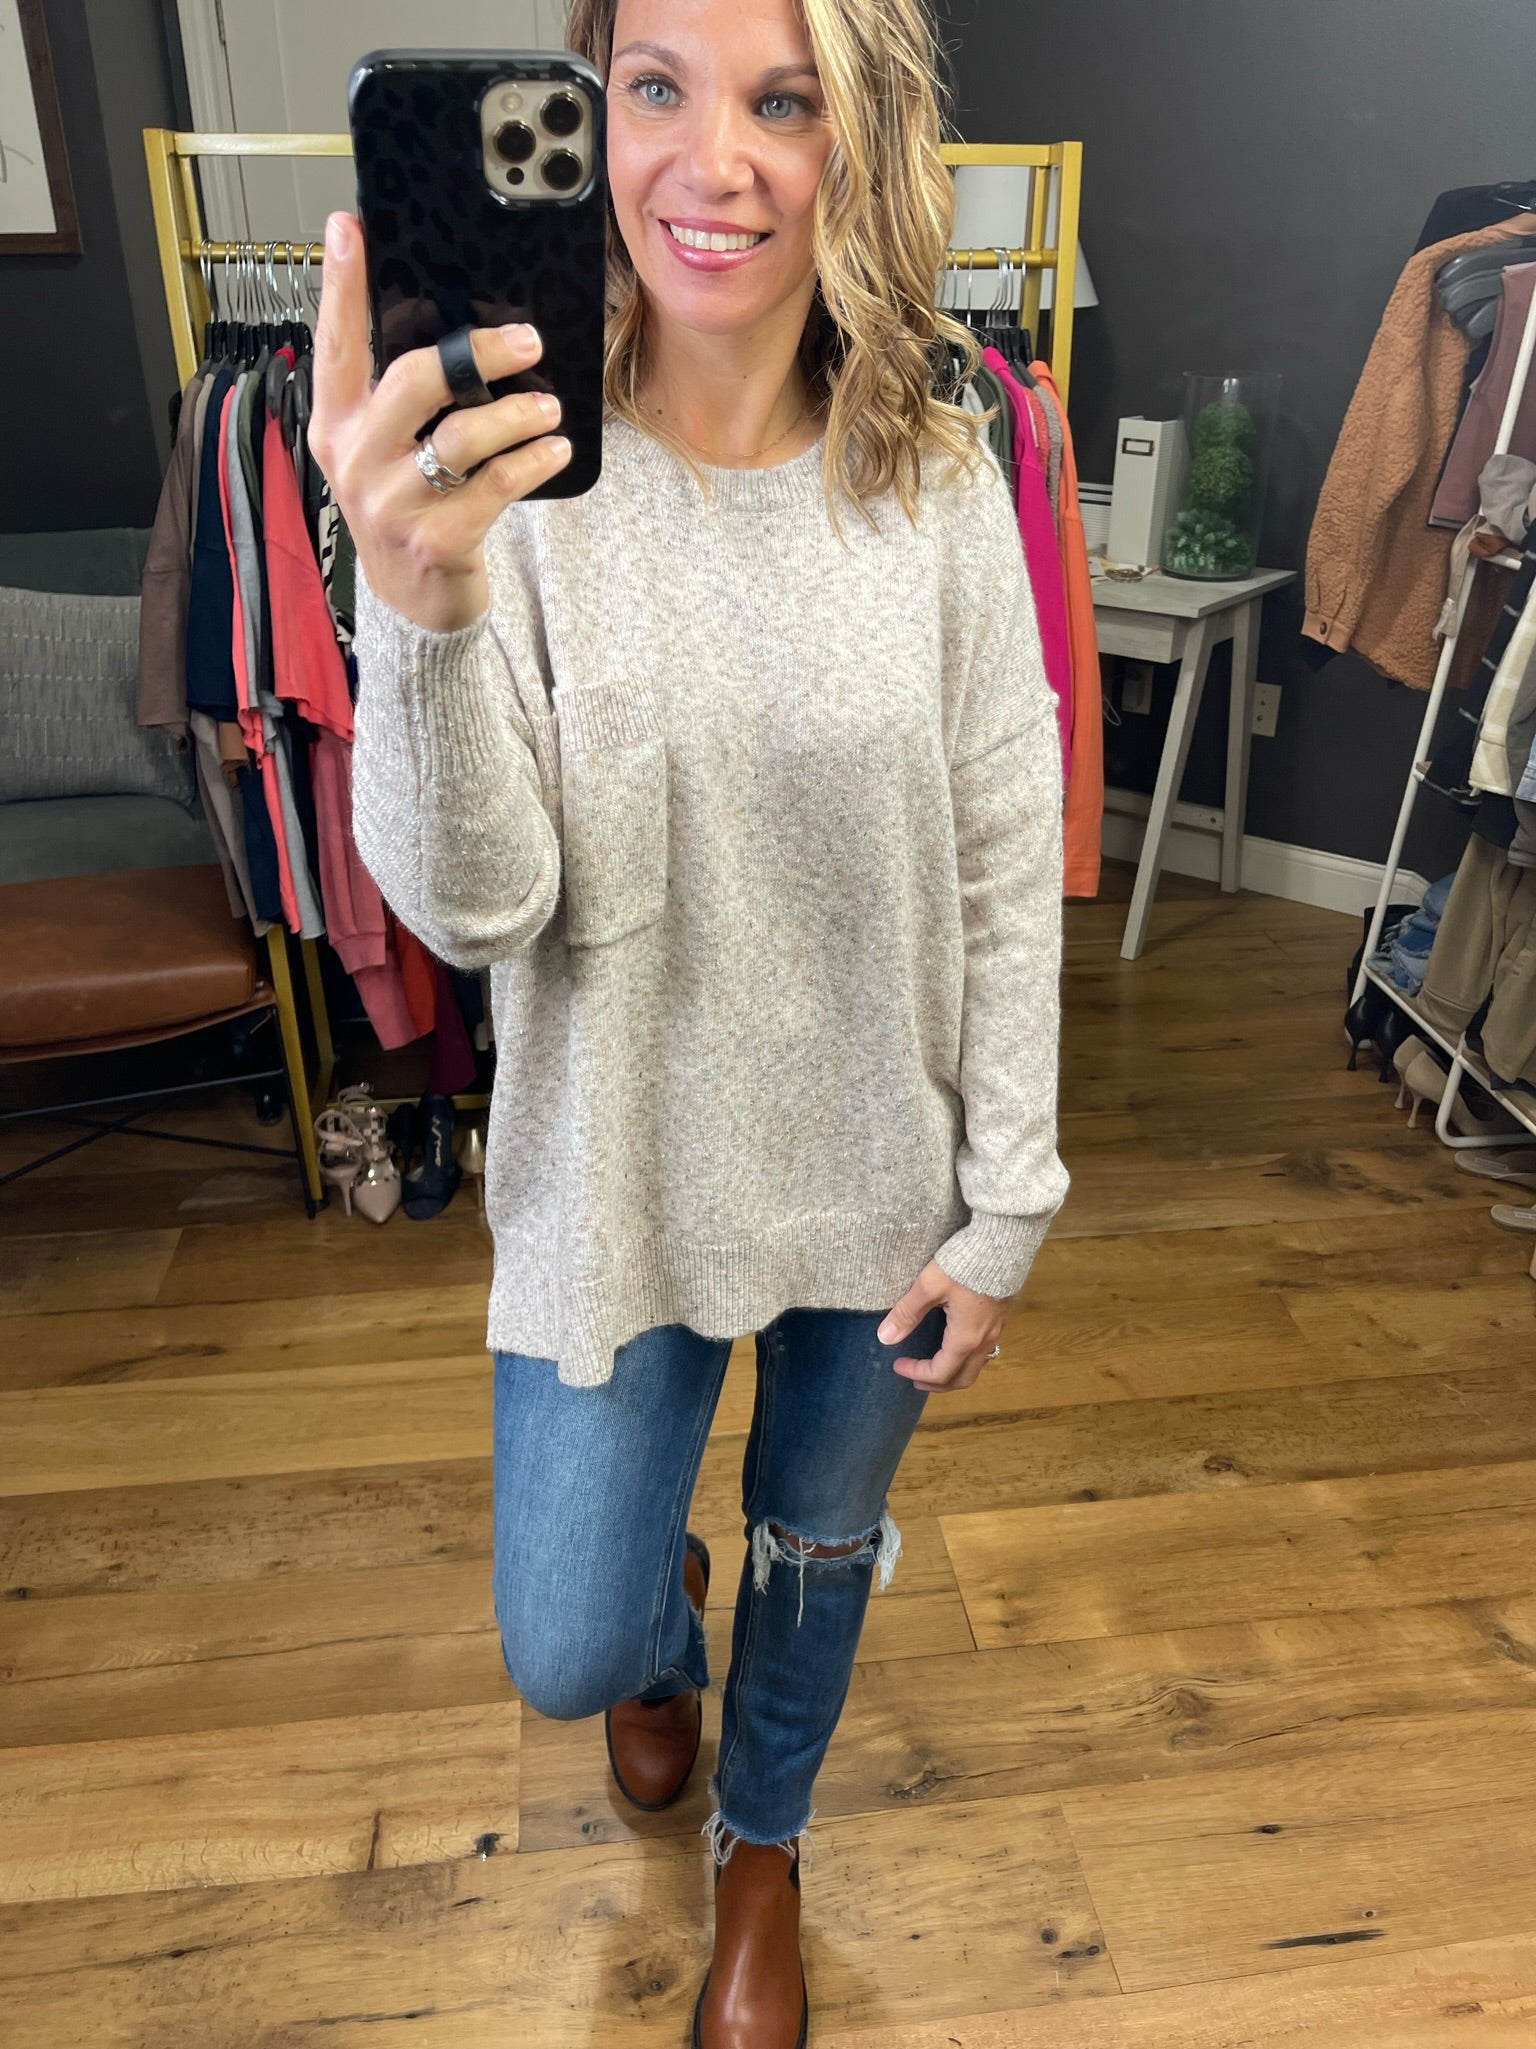 Uptown Girl Crew Sweater With Pocket Detail - Multiple Options